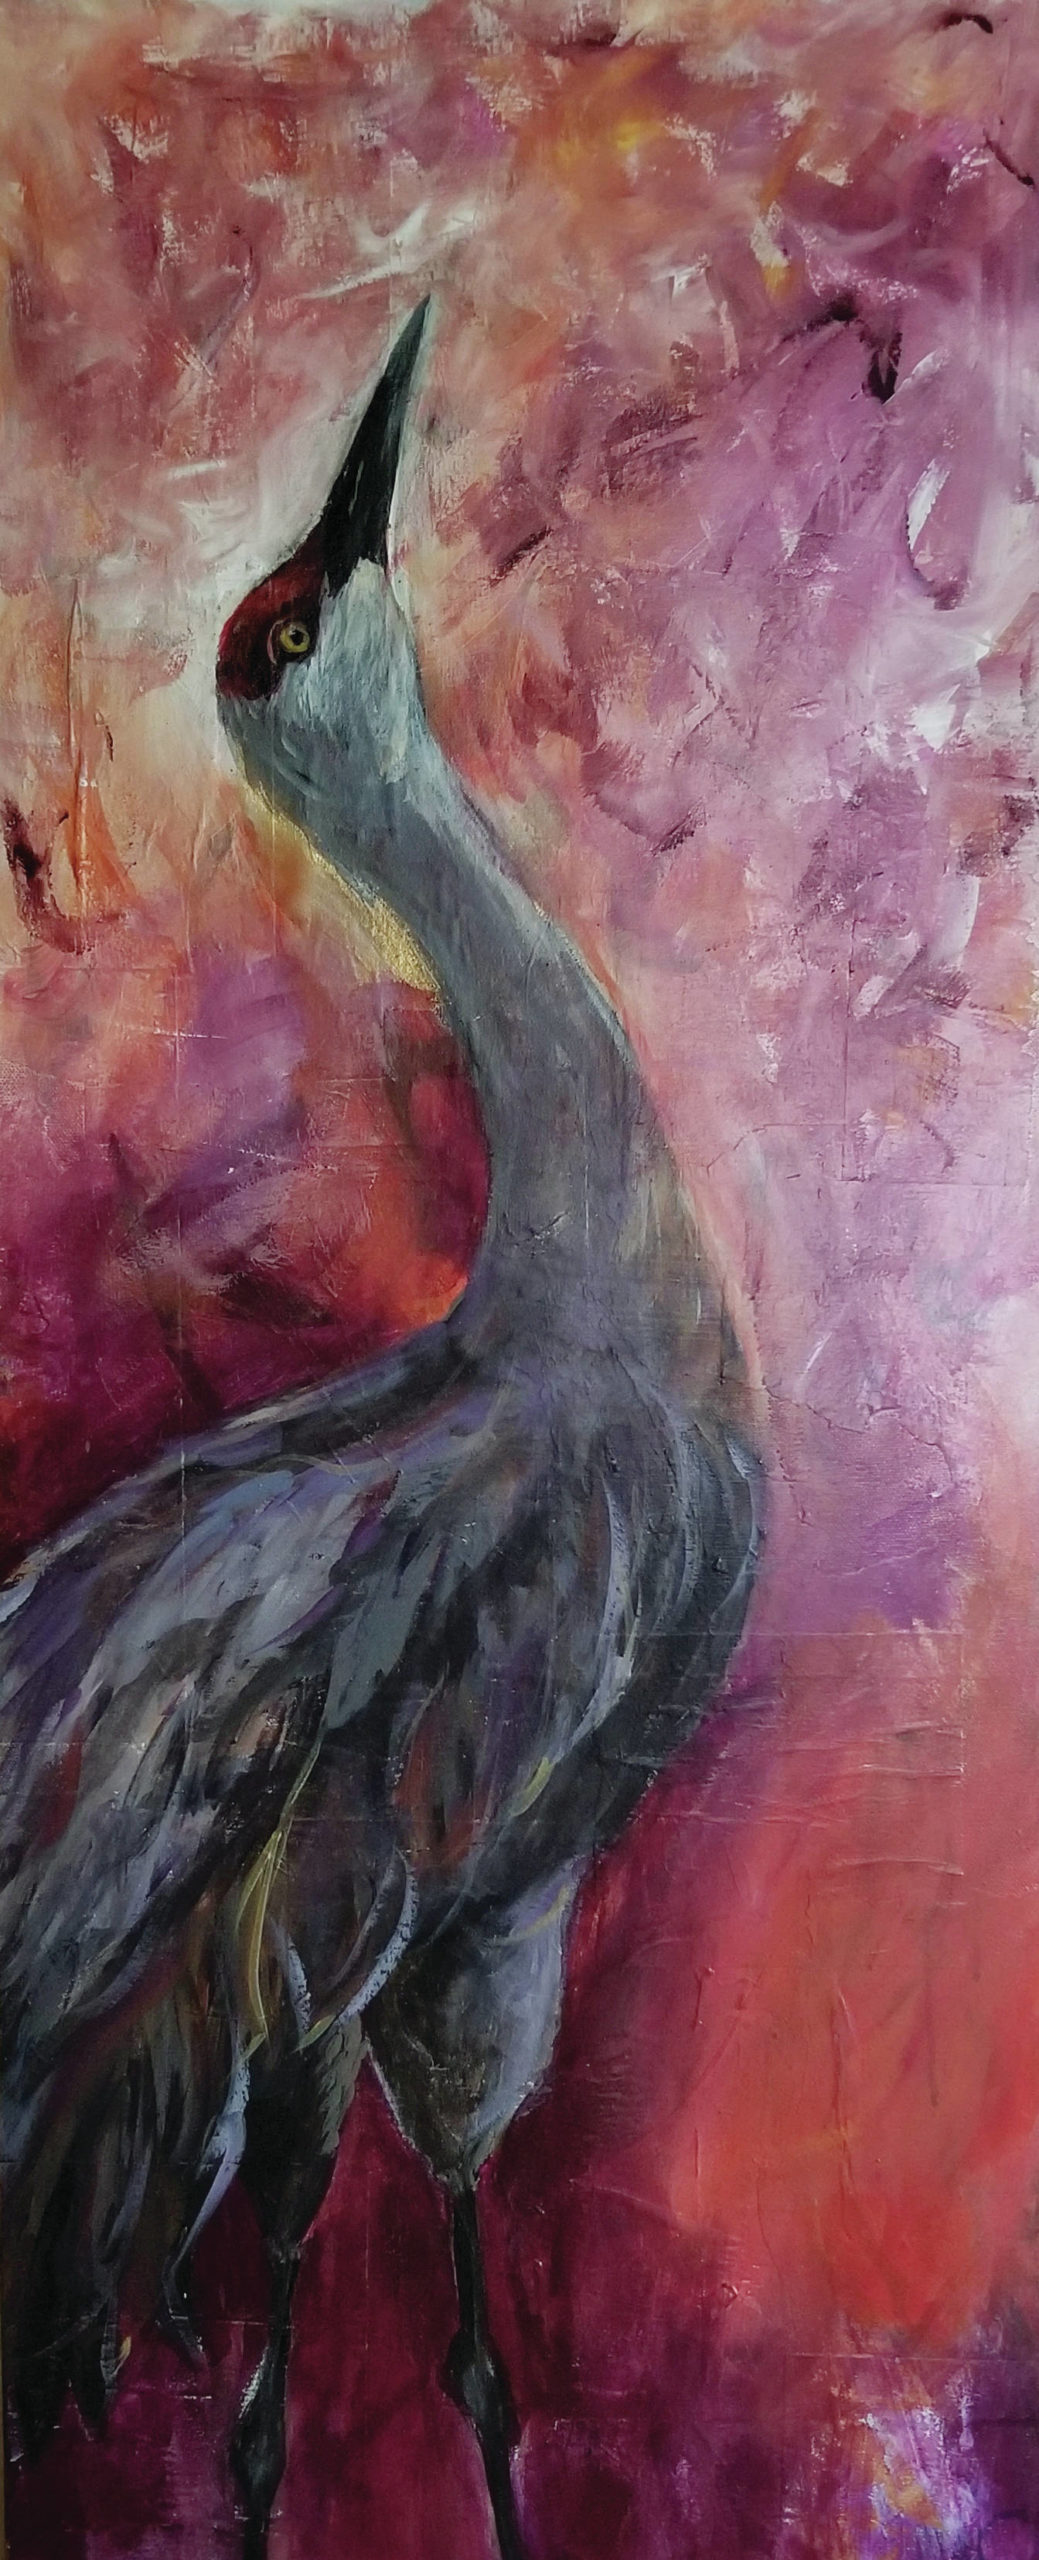 Art by Abby Ullen from a show opening Friday, Aug. 7, 2020, at Ptarmigan Arts in Homer, Alaska. (Photo courtesy Ptarmigan Arts)